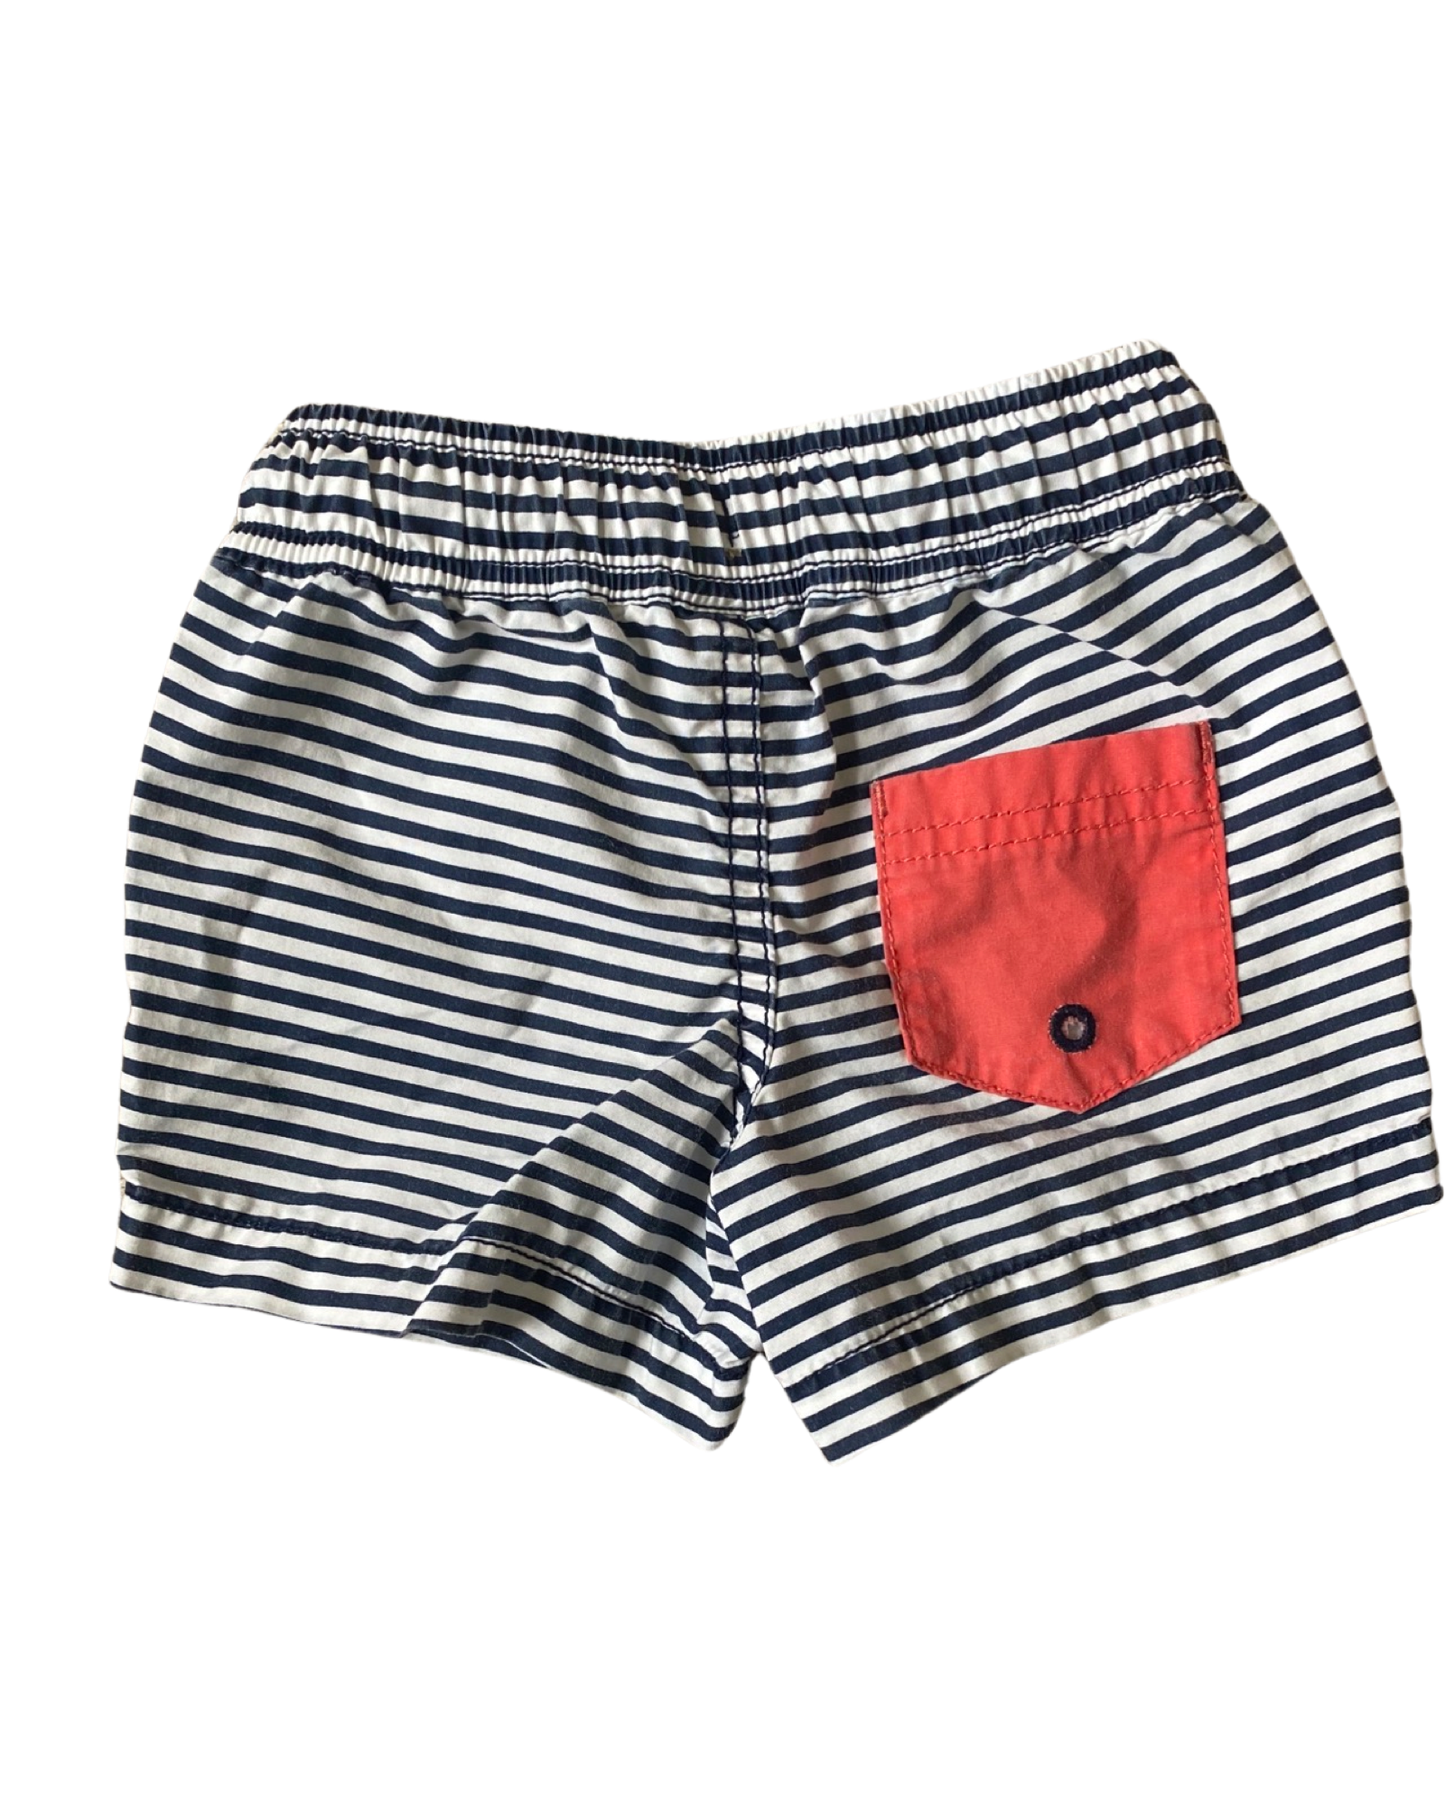 Country Road striped swim trunks (size 3-6mths)